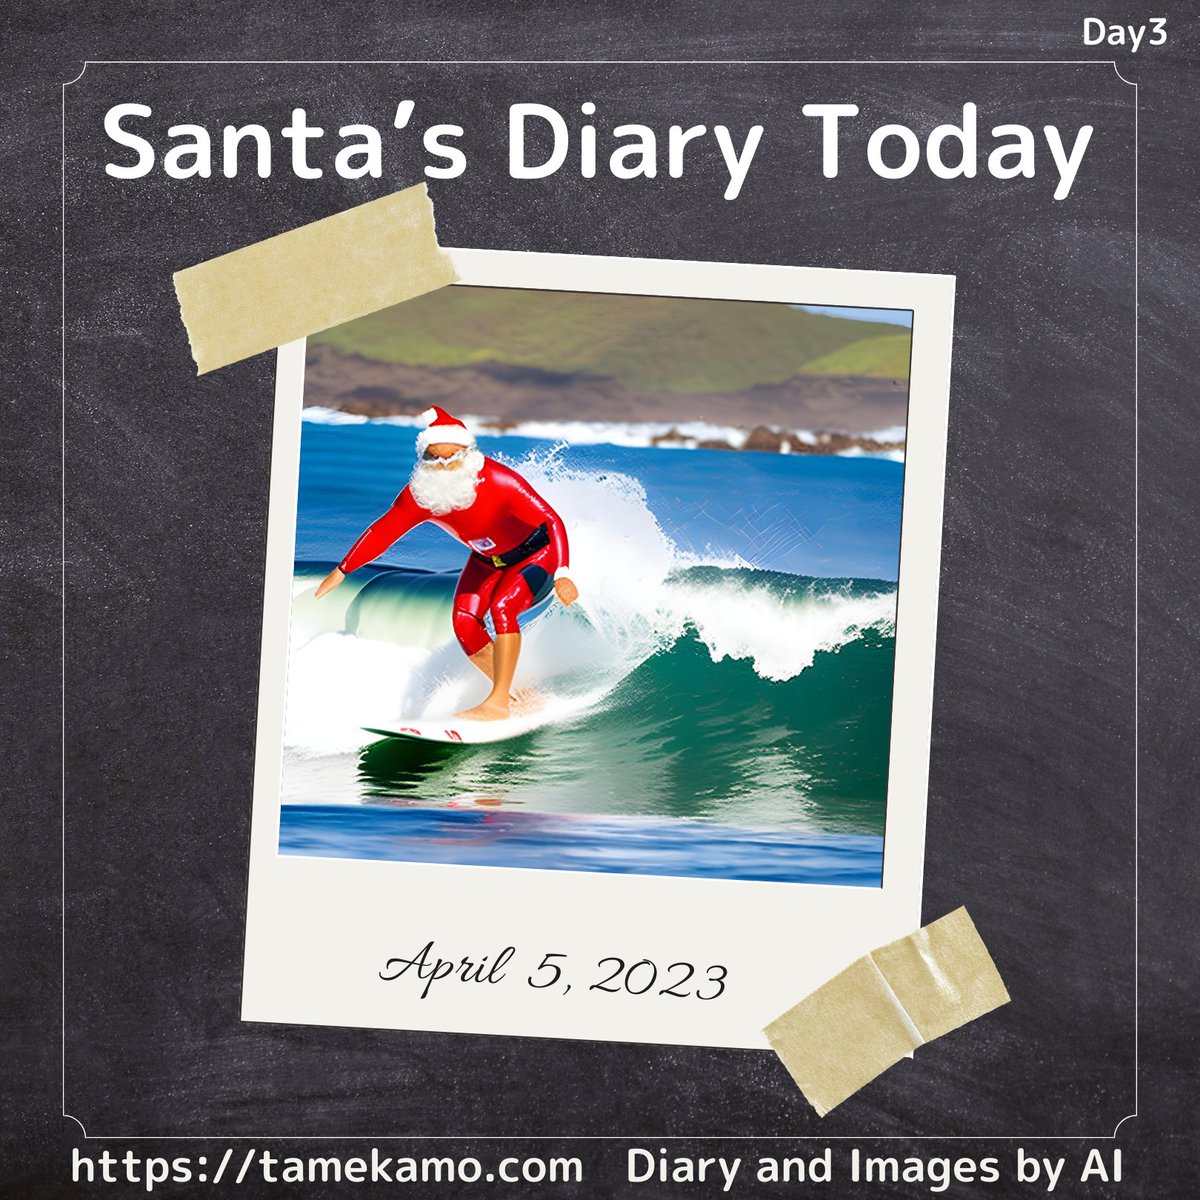 Day3: Today I tried surfing for the first time in my life. I felt like I could ride the waves. Spent the afternoon shopping and walking around town.

#texttoimage #AI #chatGPT #SantaDiary #WhereSanta #santanow #SantaTracker #TodaySanta